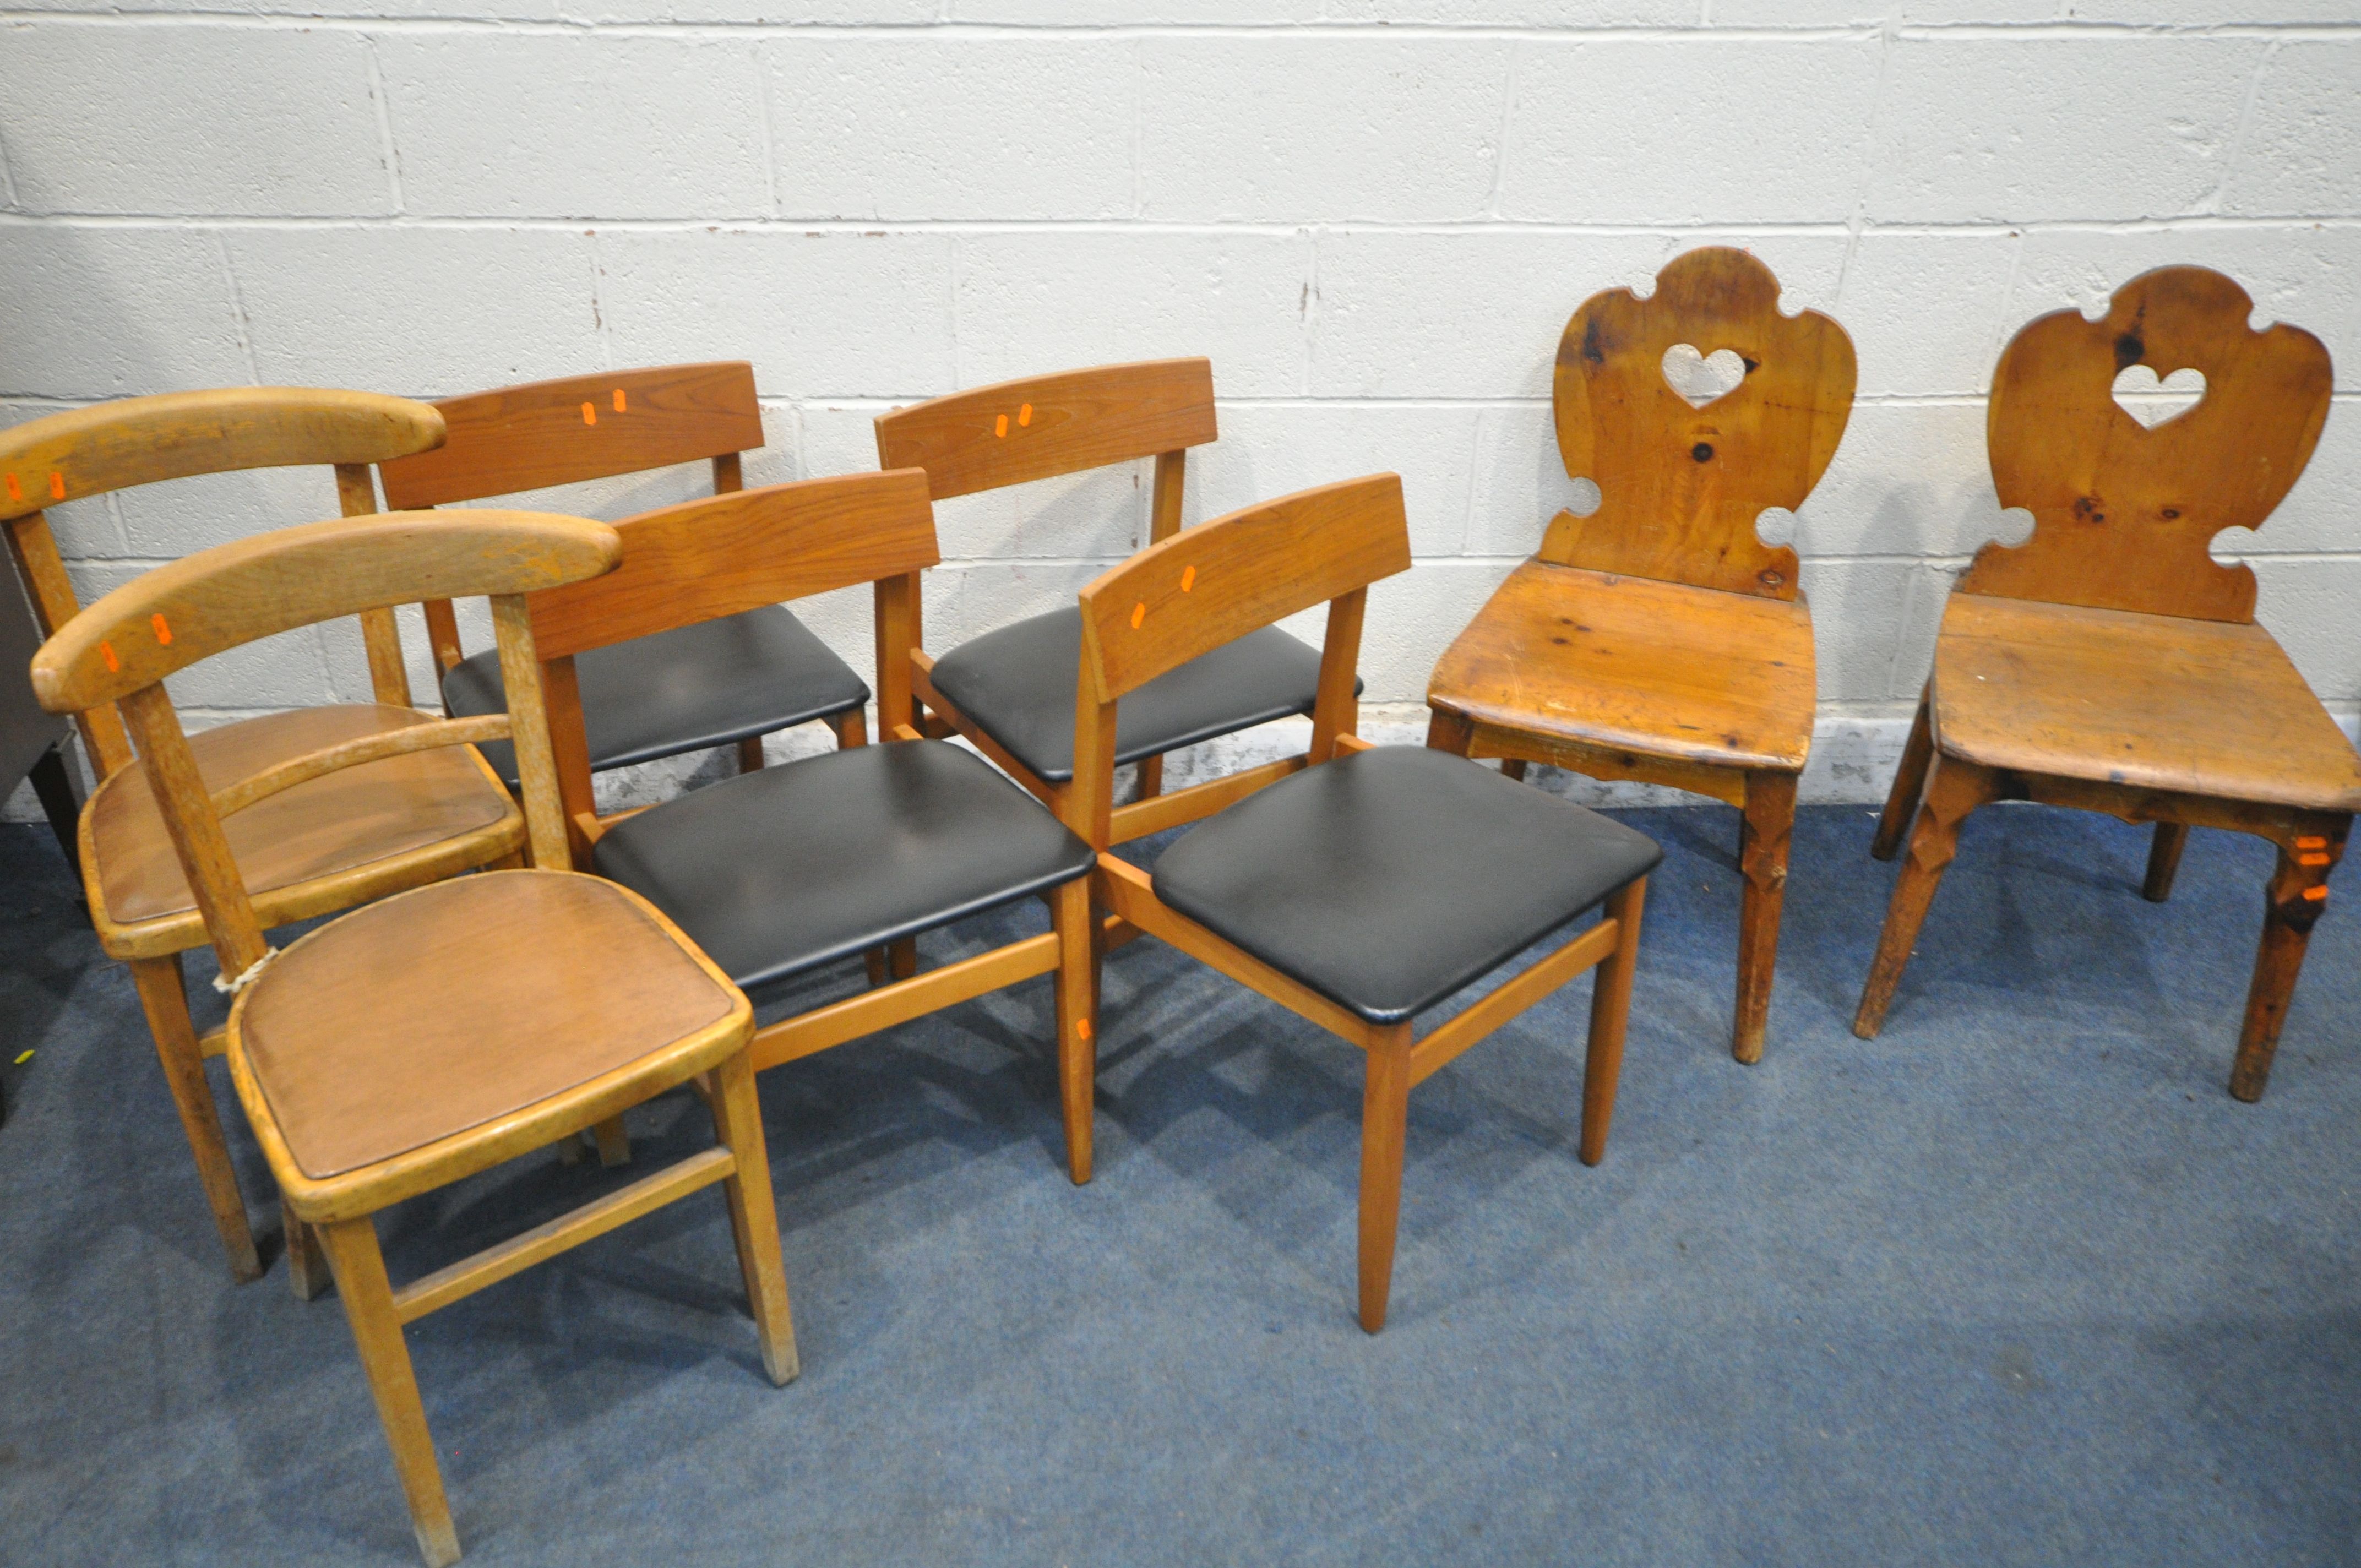 A SELECTION OF CHAIRS, to include a pair of pine hall chairs, a set of four mid-century teak chairs,